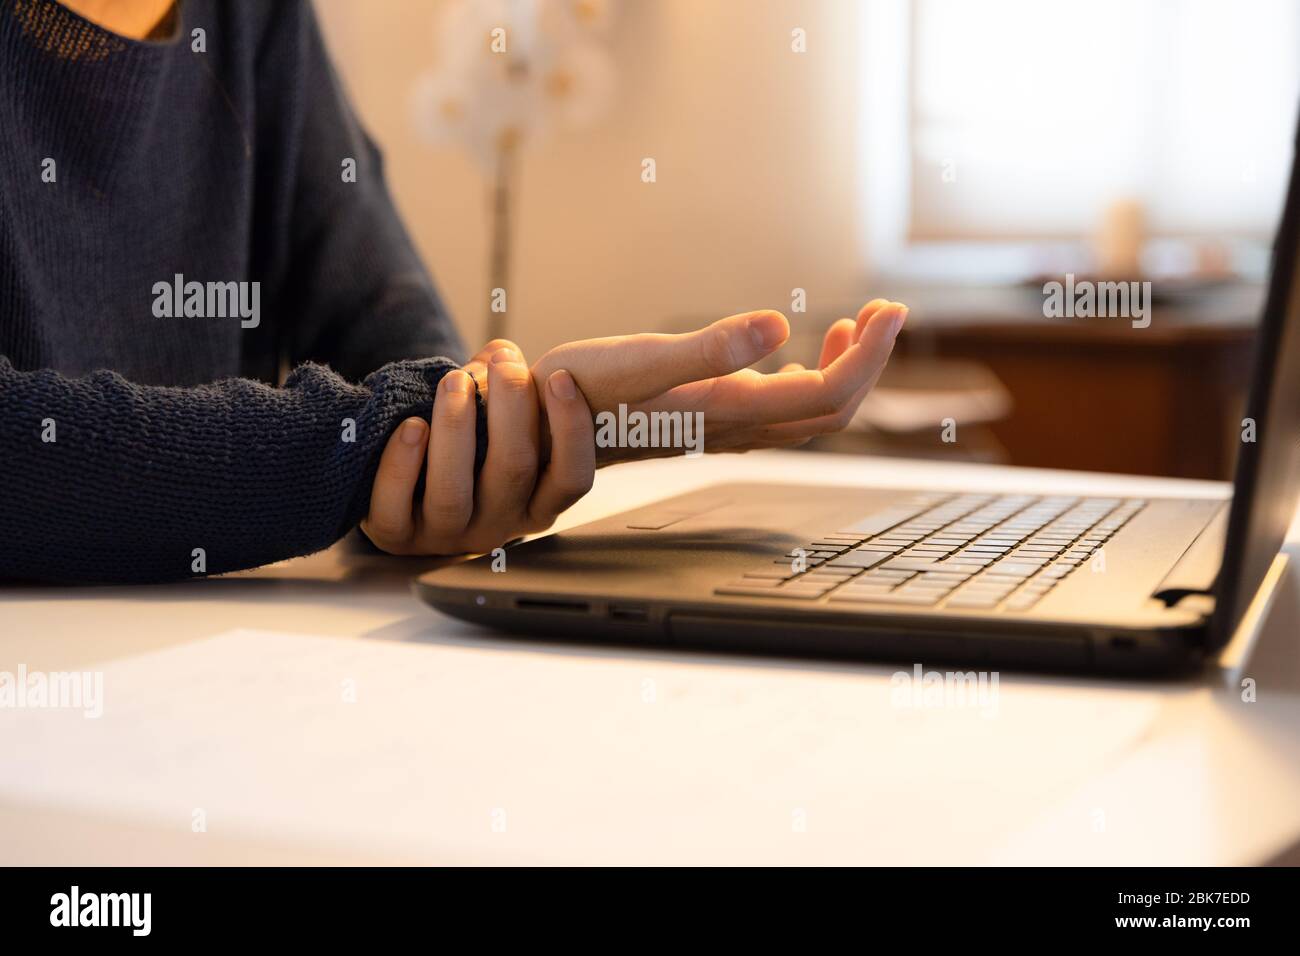 Woman hands with injured wrist complaining Stock Photo